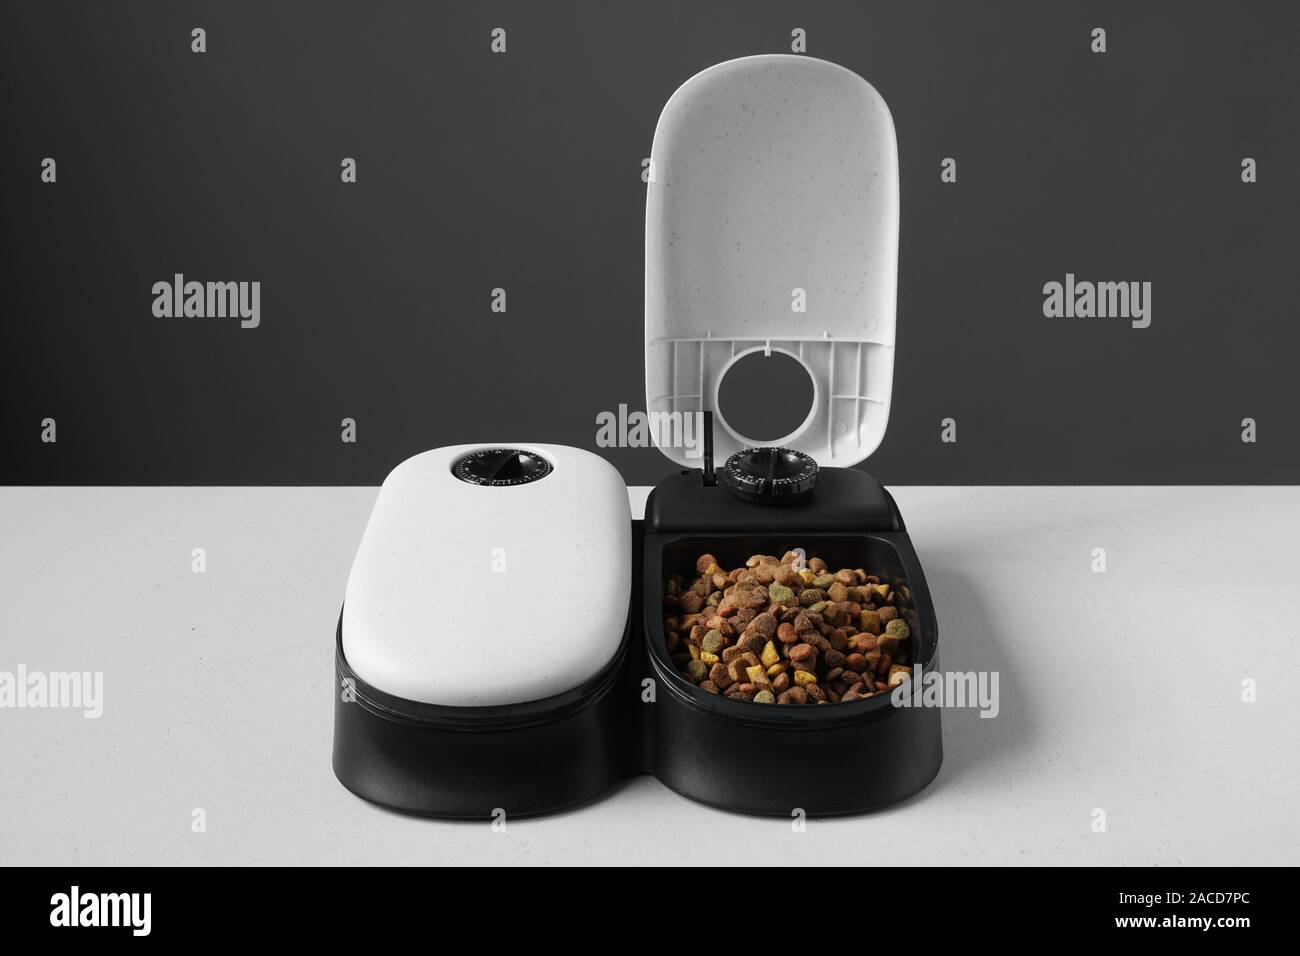 automatic cat food dispenser or pet feeder Stock Photo